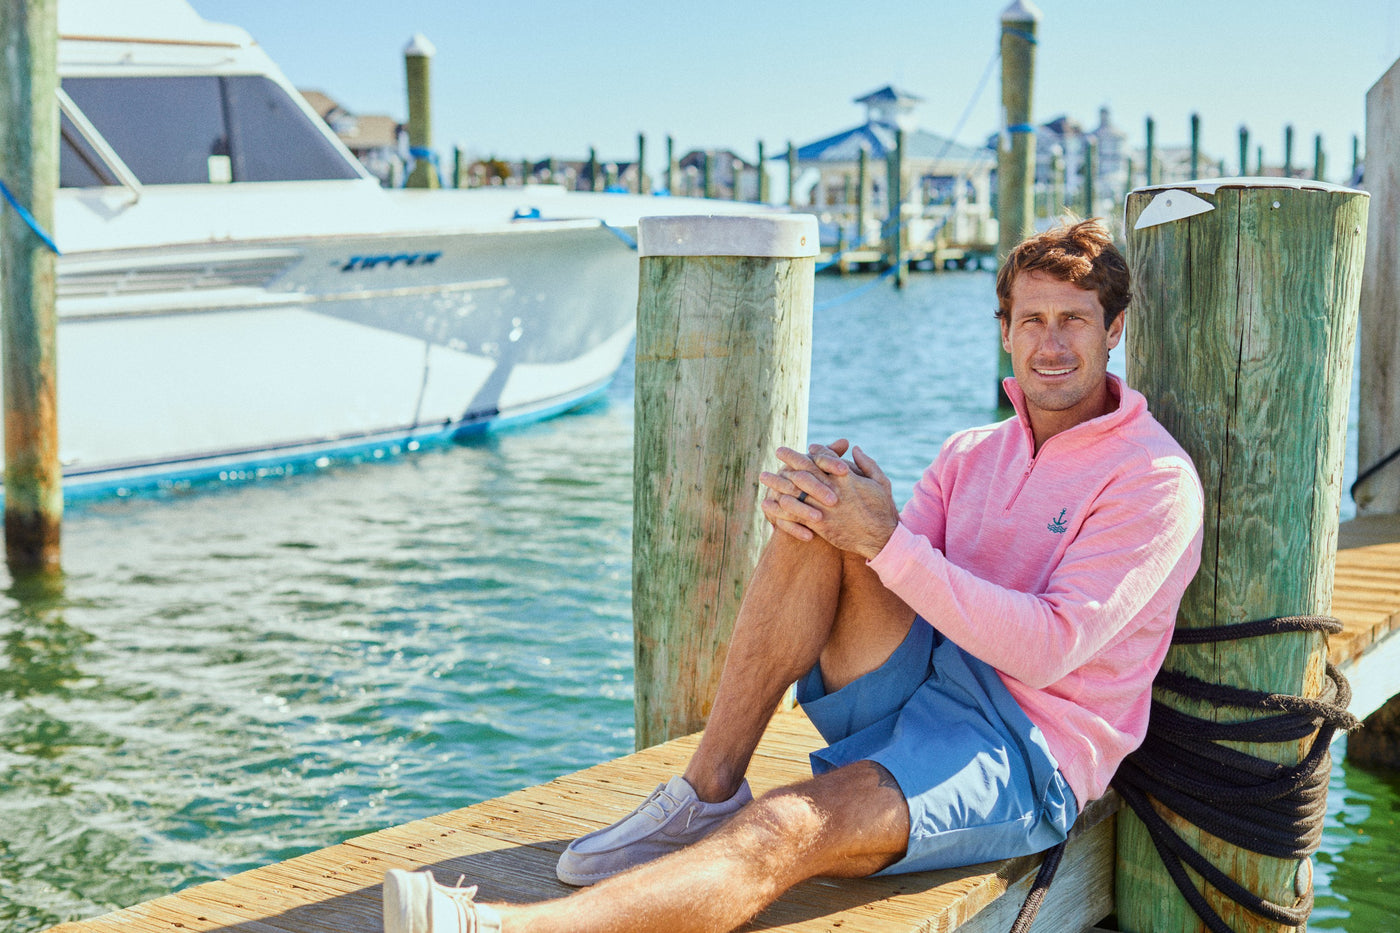 Preppy man on dock with fleece and shorts.